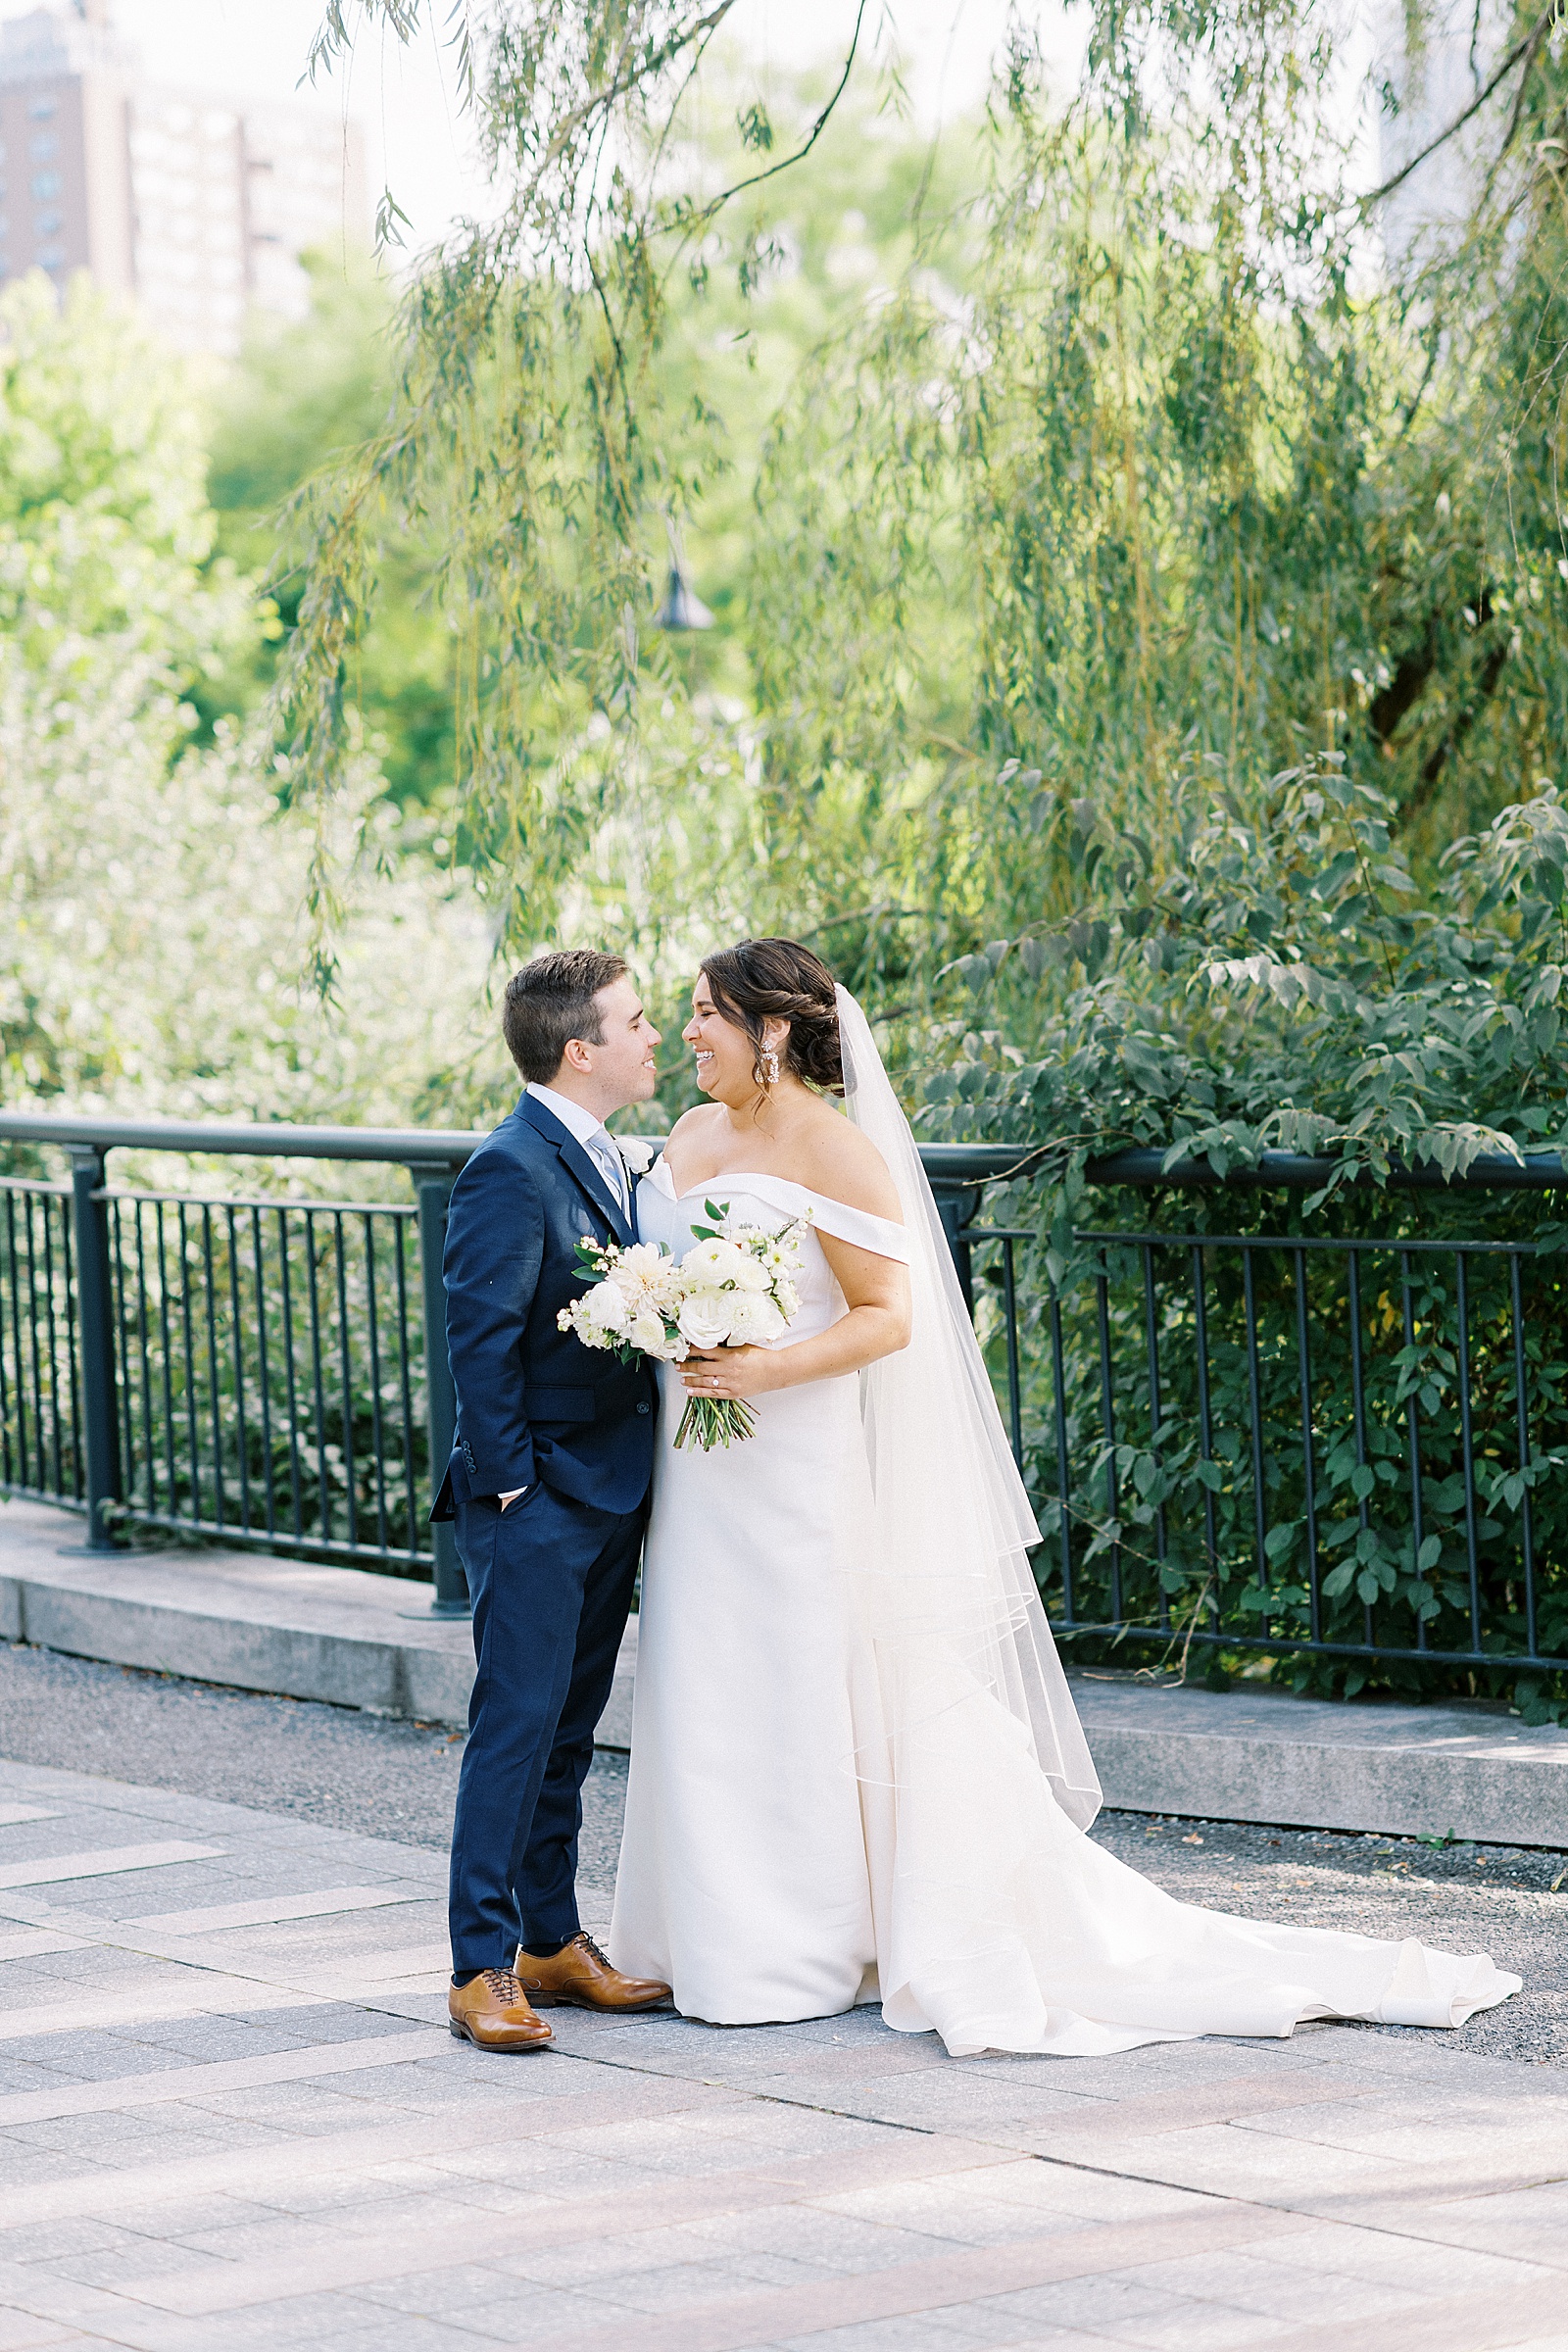 wedding couple embracing in a New York Park before their wedding